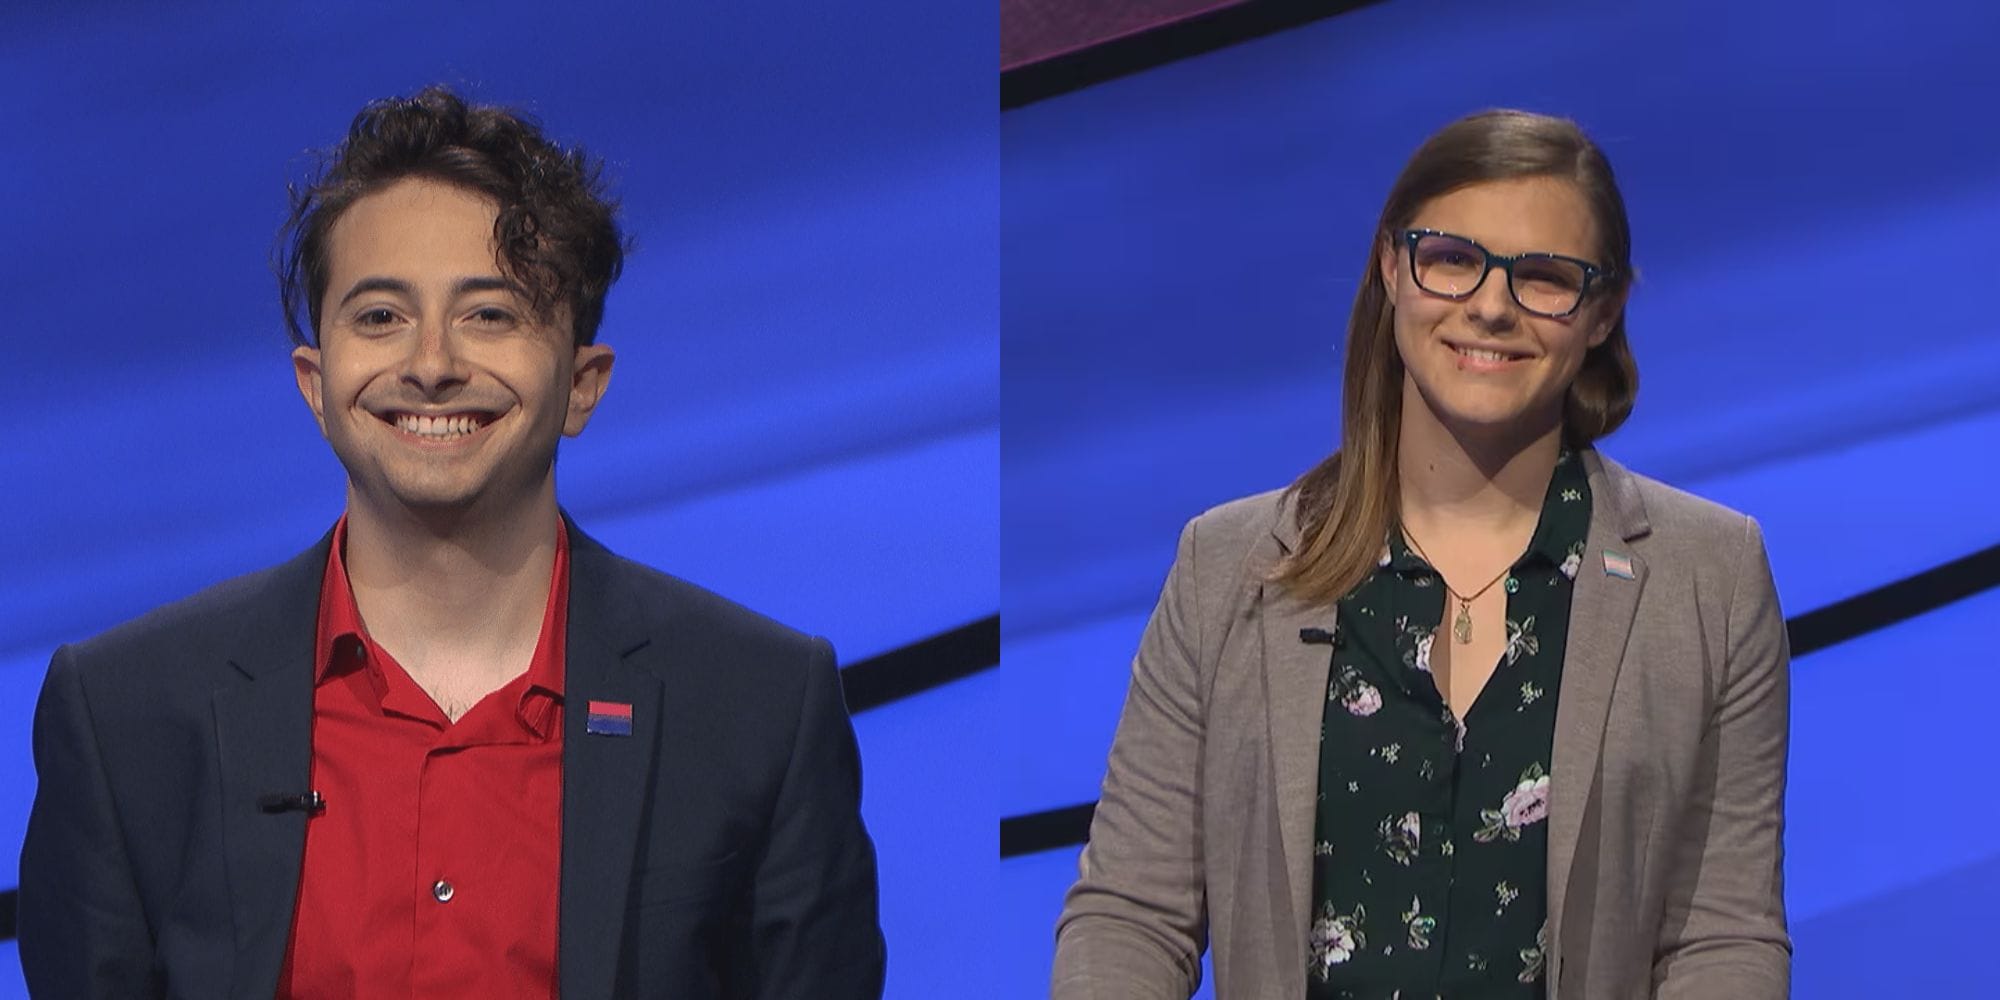 Kate Freeman Jeopardy Before and After